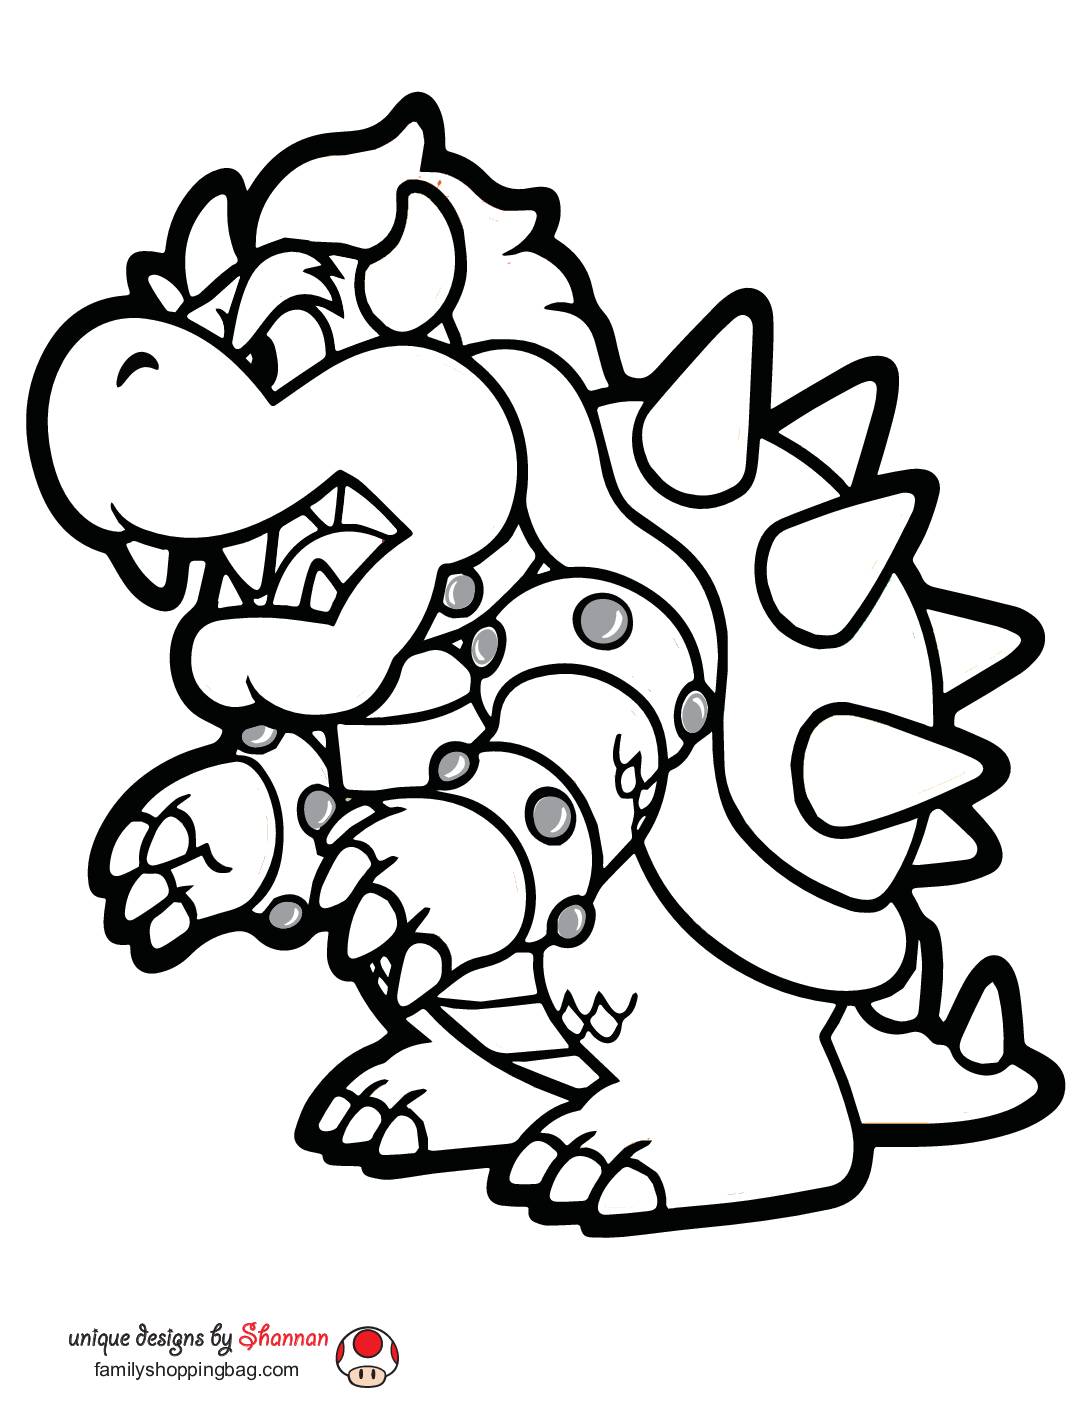 Mario Bowser Coloring Pages